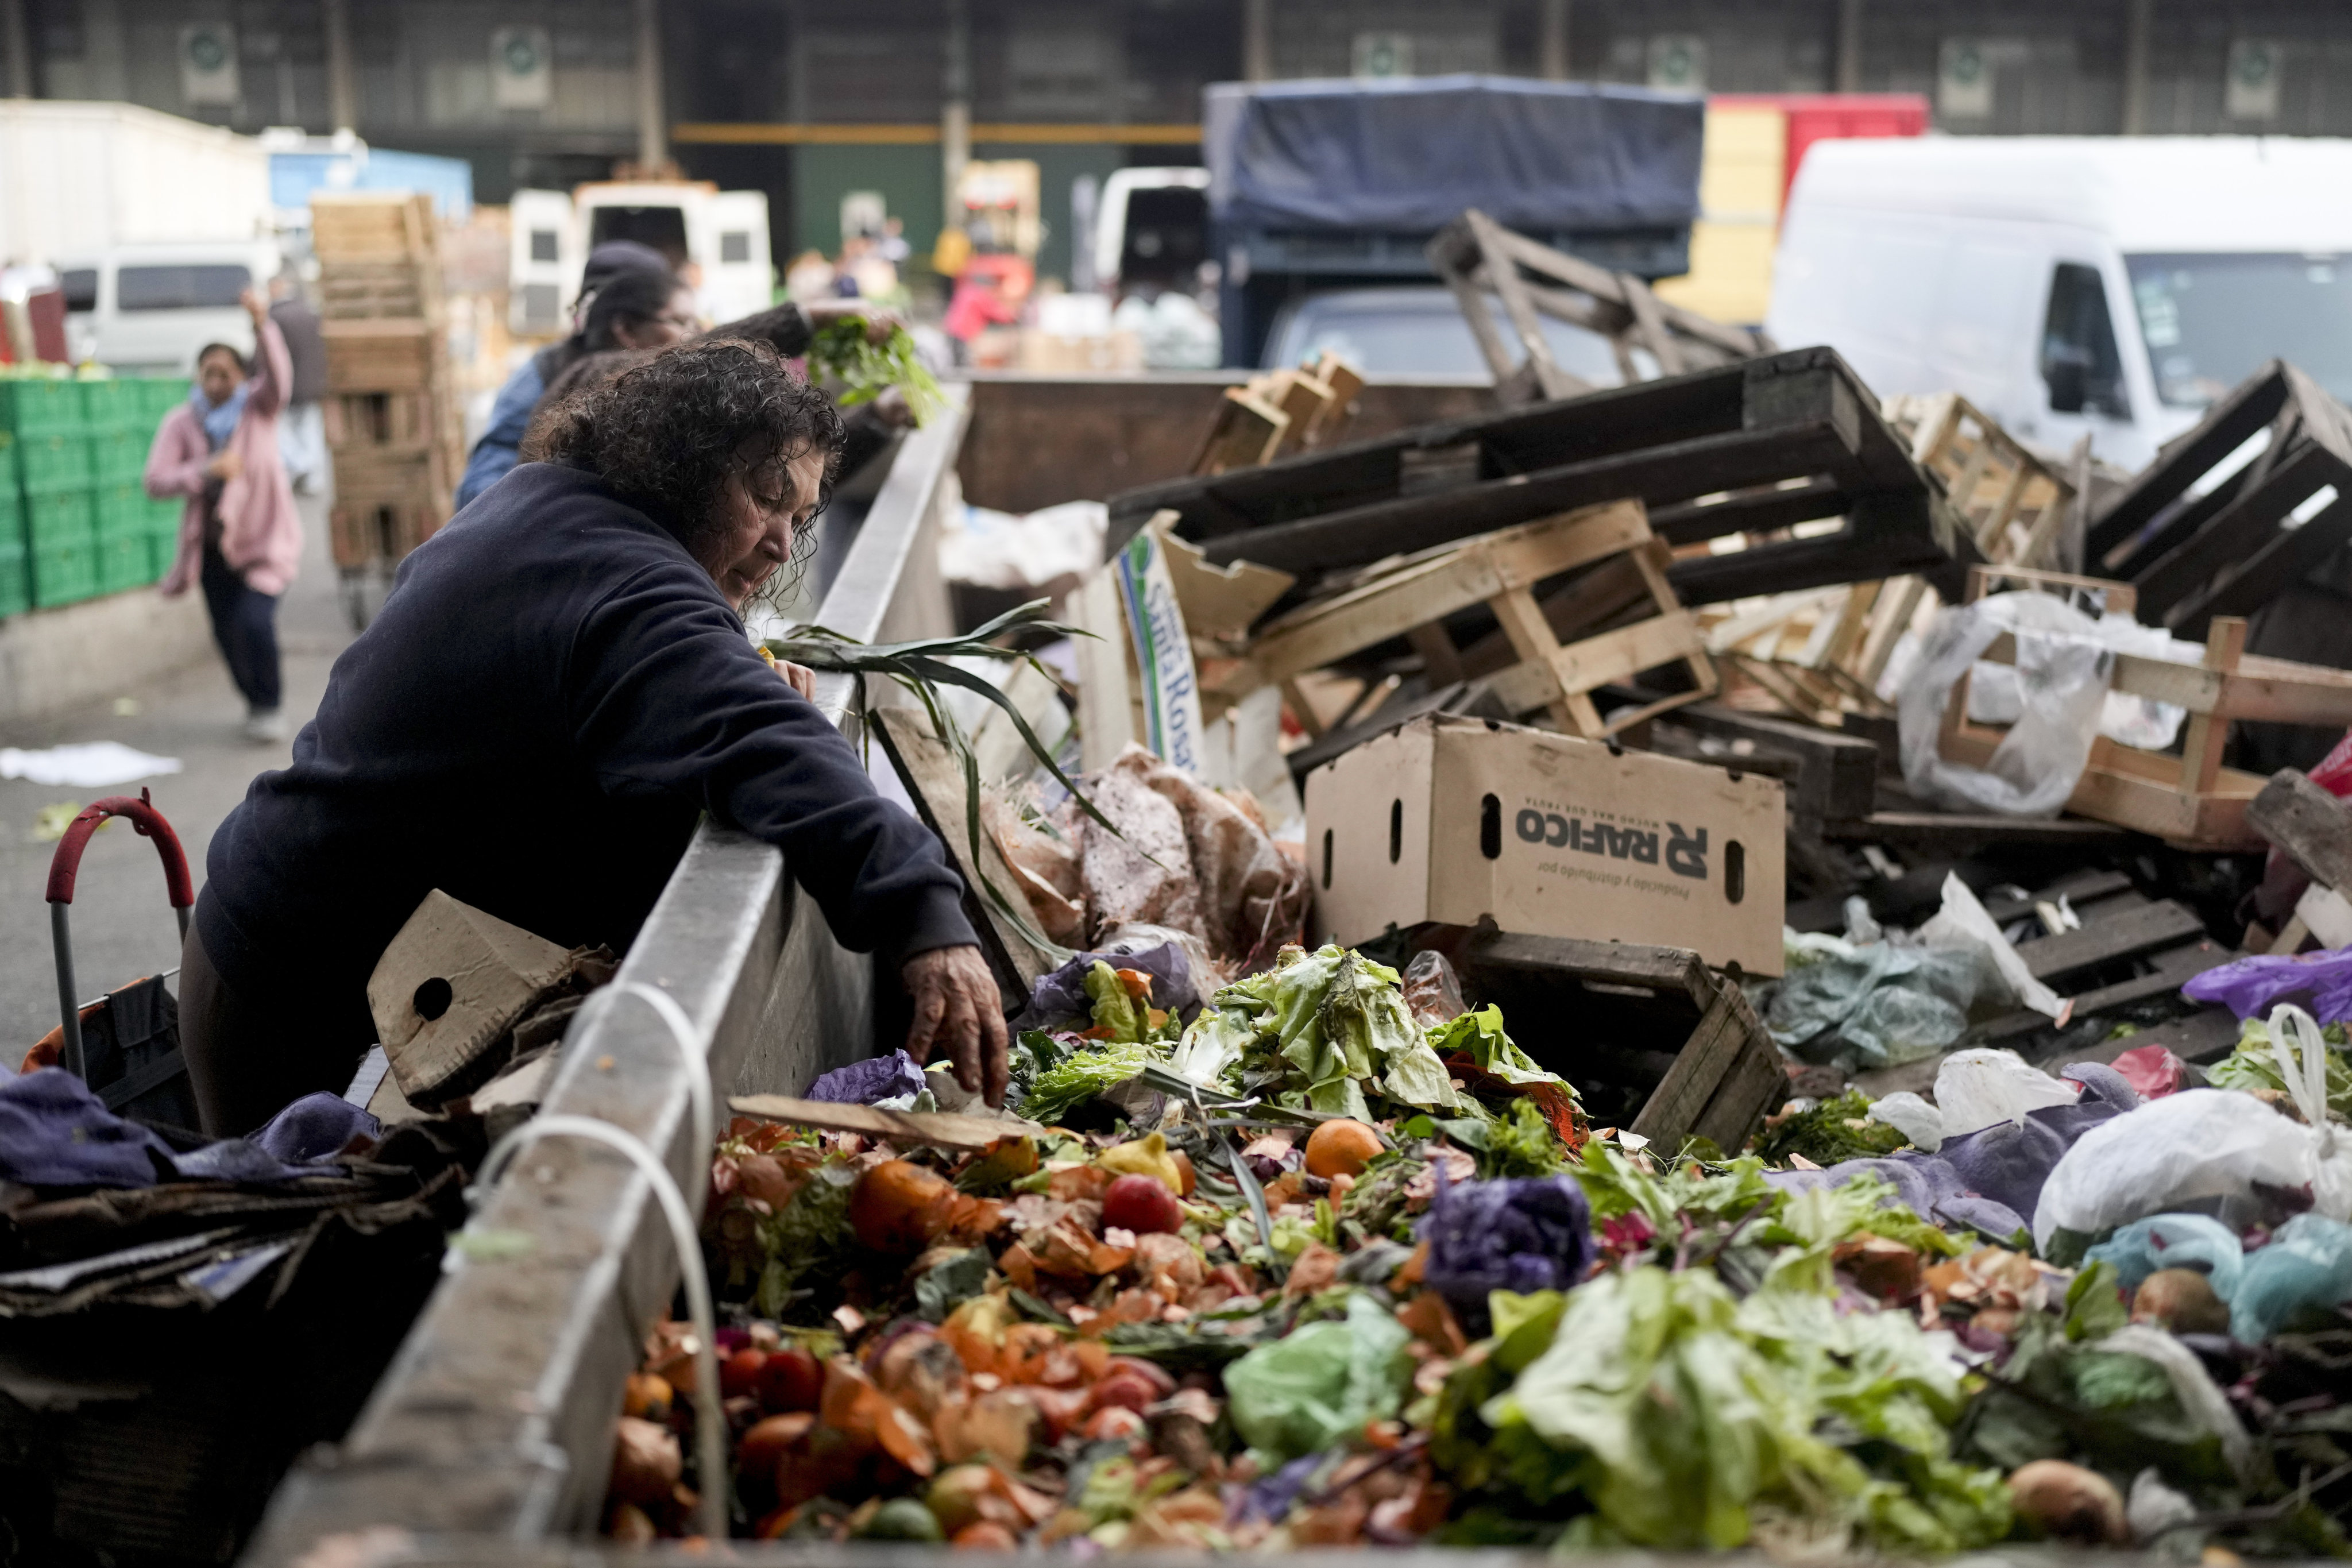 A woman reaches in a bin of discarded produce outside a market in Buenos Aires, Argentina. Photo: AP